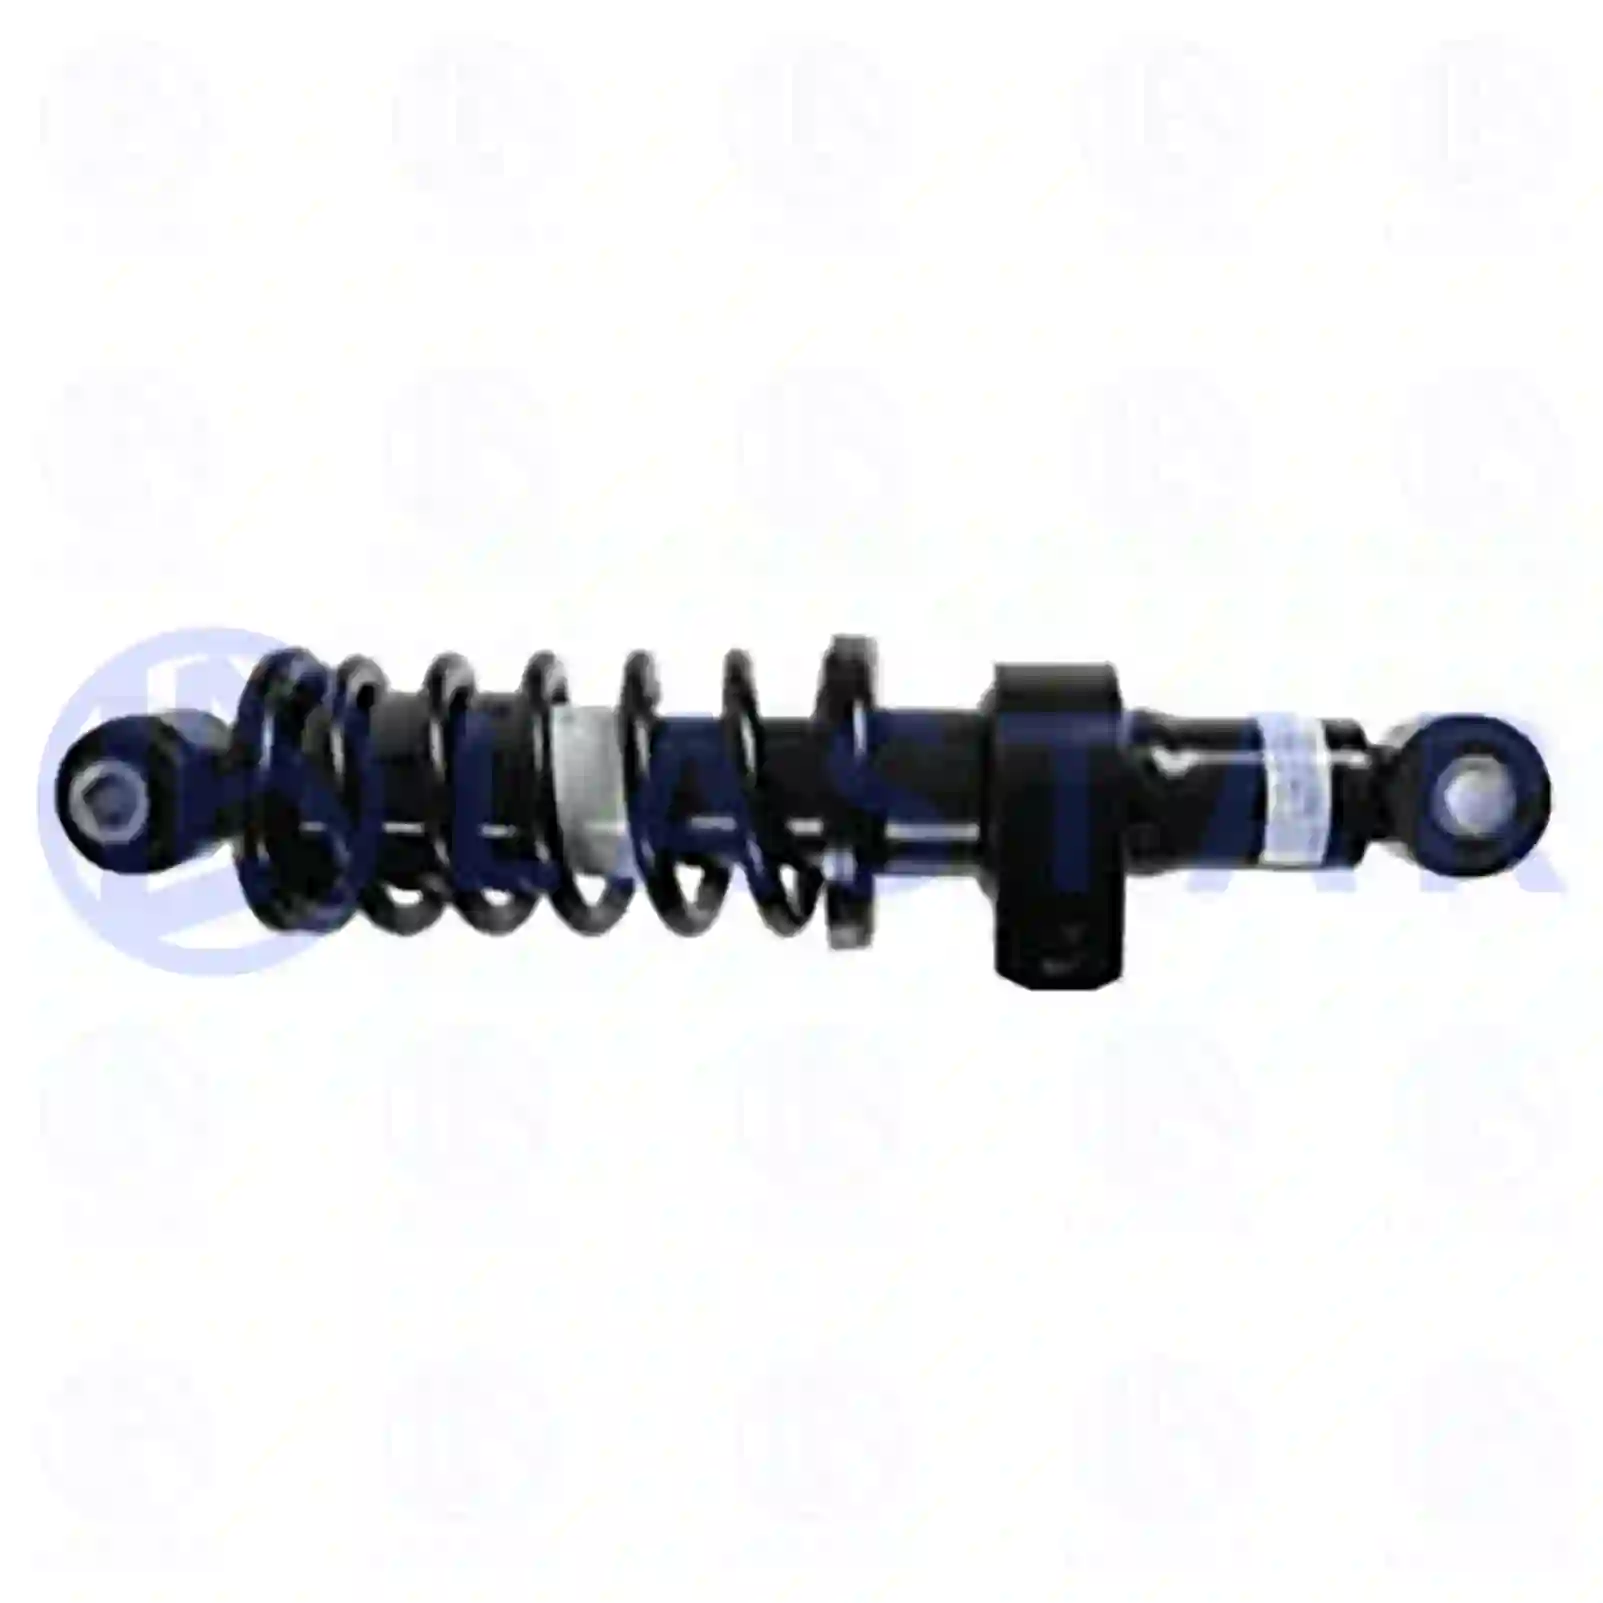 Cabin shock absorber, 77735613, 41028759, 41028760, 500348797, 500377861, ||  77735613 Lastar Spare Part | Truck Spare Parts, Auotomotive Spare Parts Cabin shock absorber, 77735613, 41028759, 41028760, 500348797, 500377861, ||  77735613 Lastar Spare Part | Truck Spare Parts, Auotomotive Spare Parts